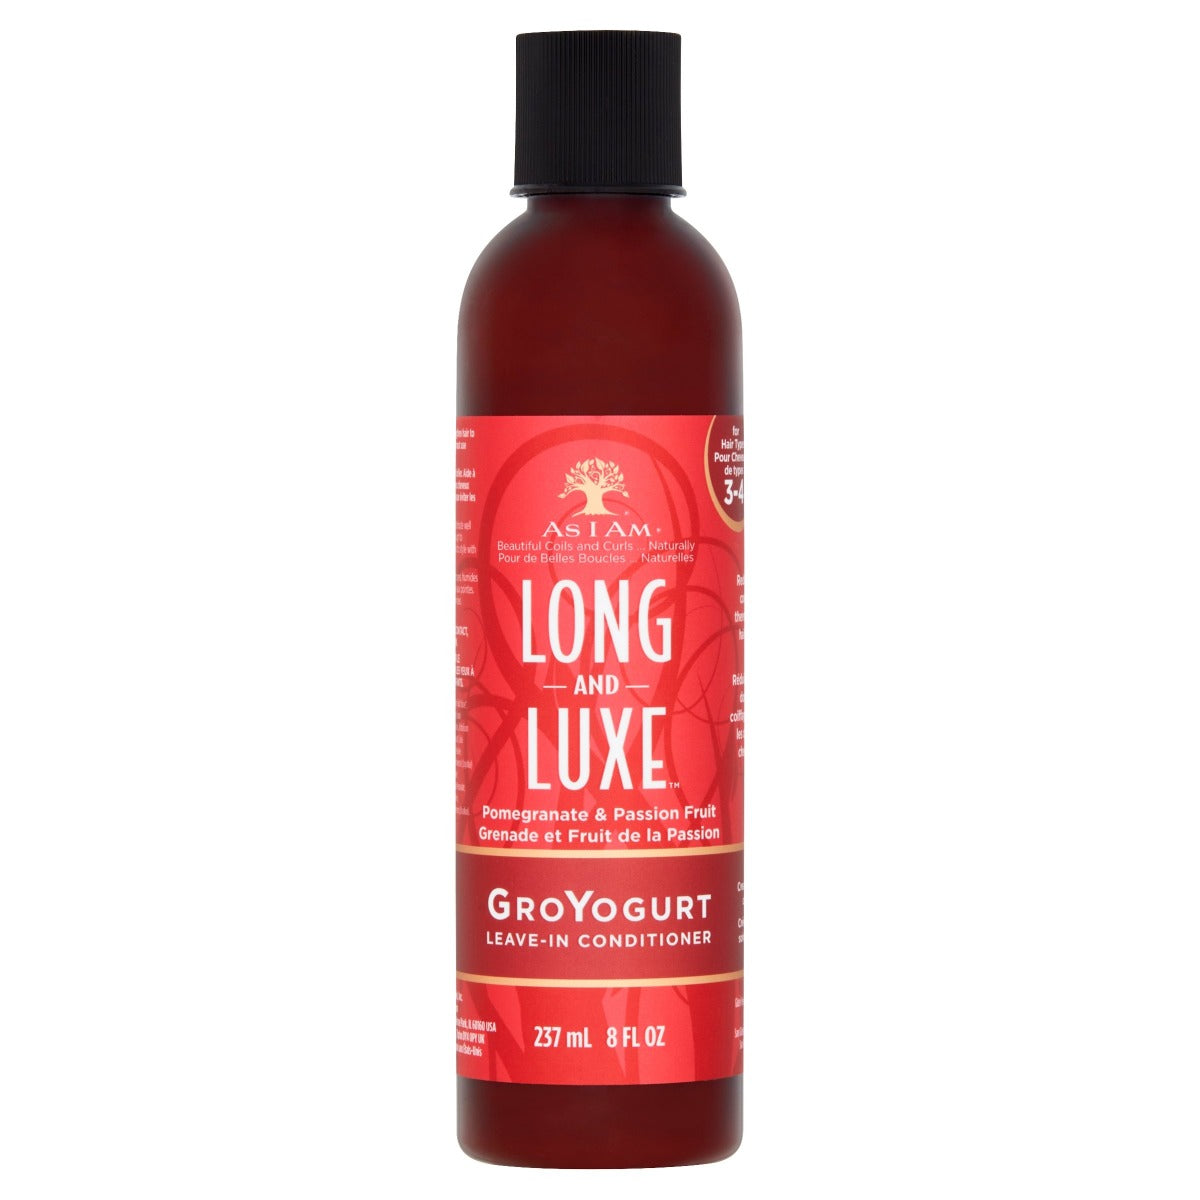 As I Am Long & Luxe GroYogurt Leave-In Conditioner 237ml